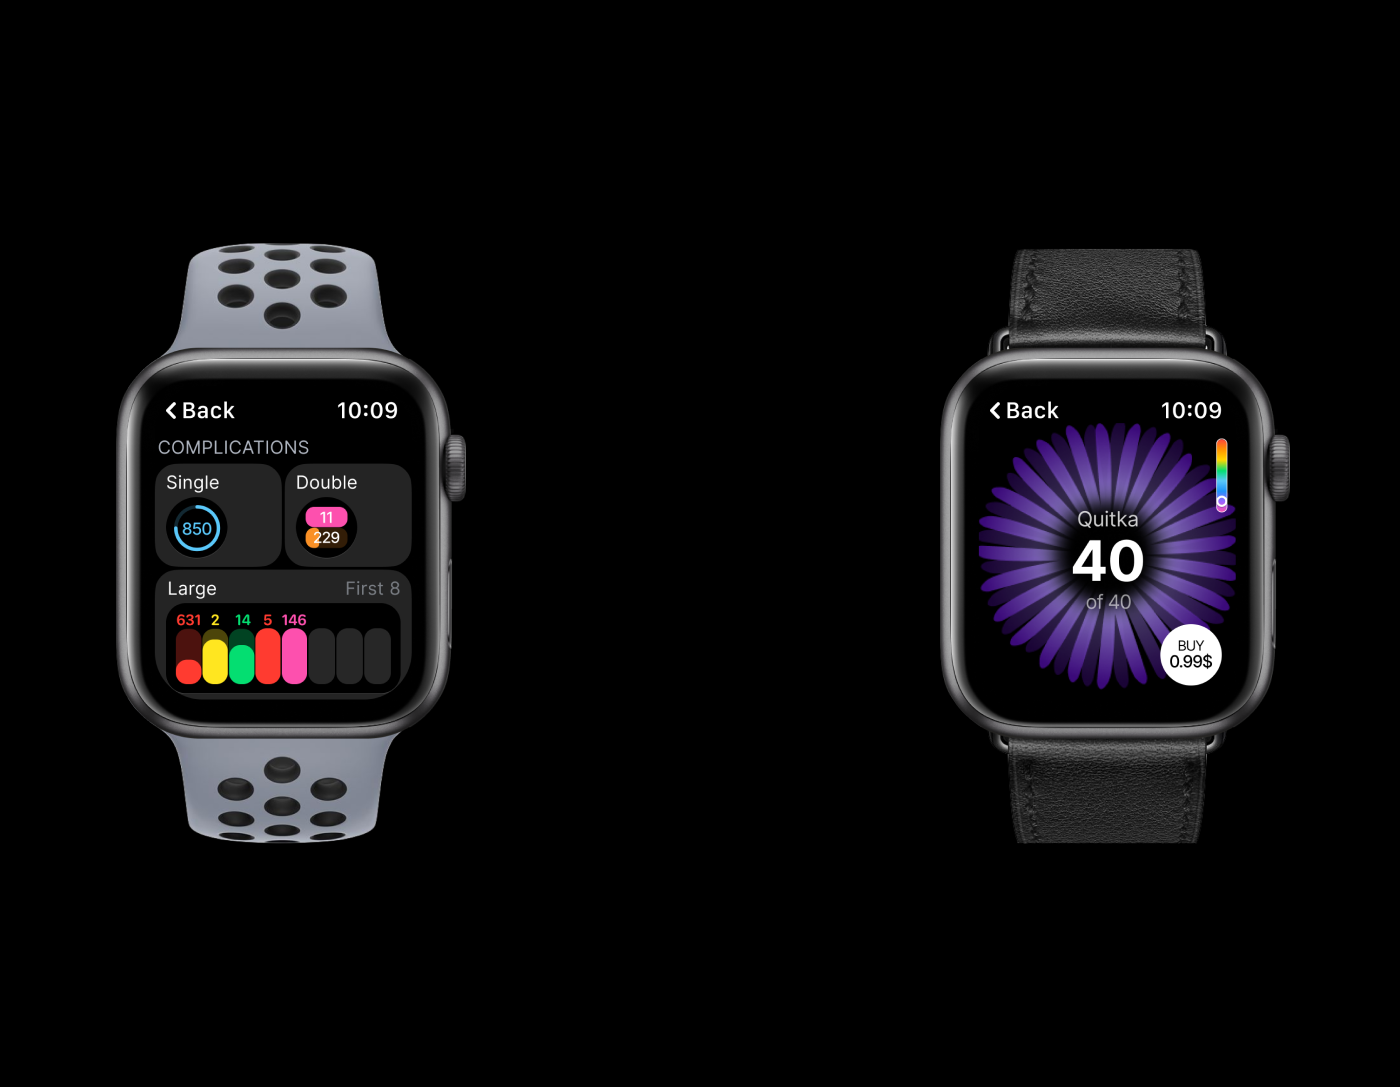 apple watch counter UI/UX user experience user interface watch Watches water applewatch